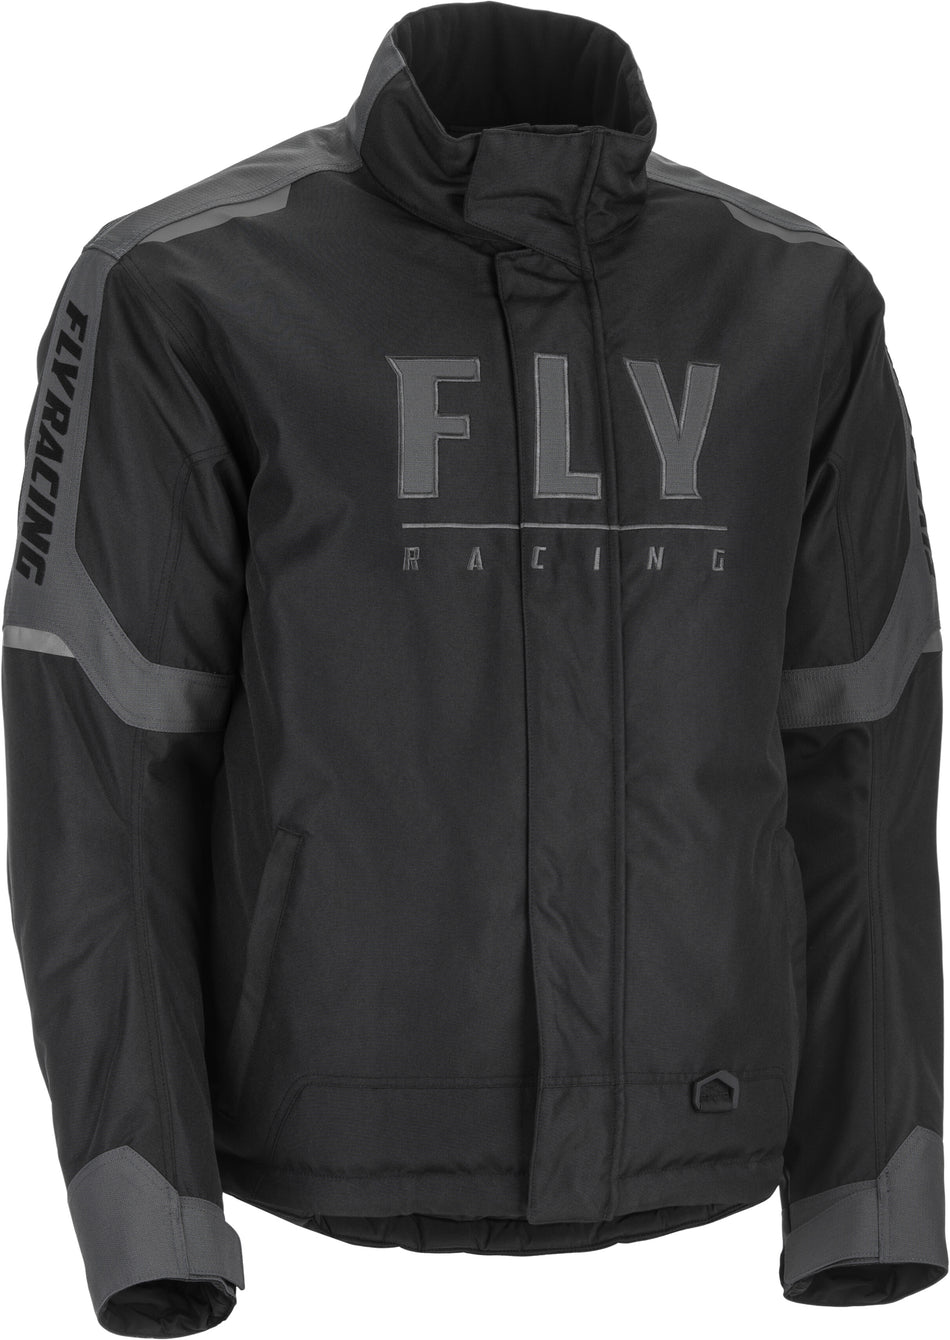 FLY RACING Outpost Jacket Black/Grey 3x 470-41403X